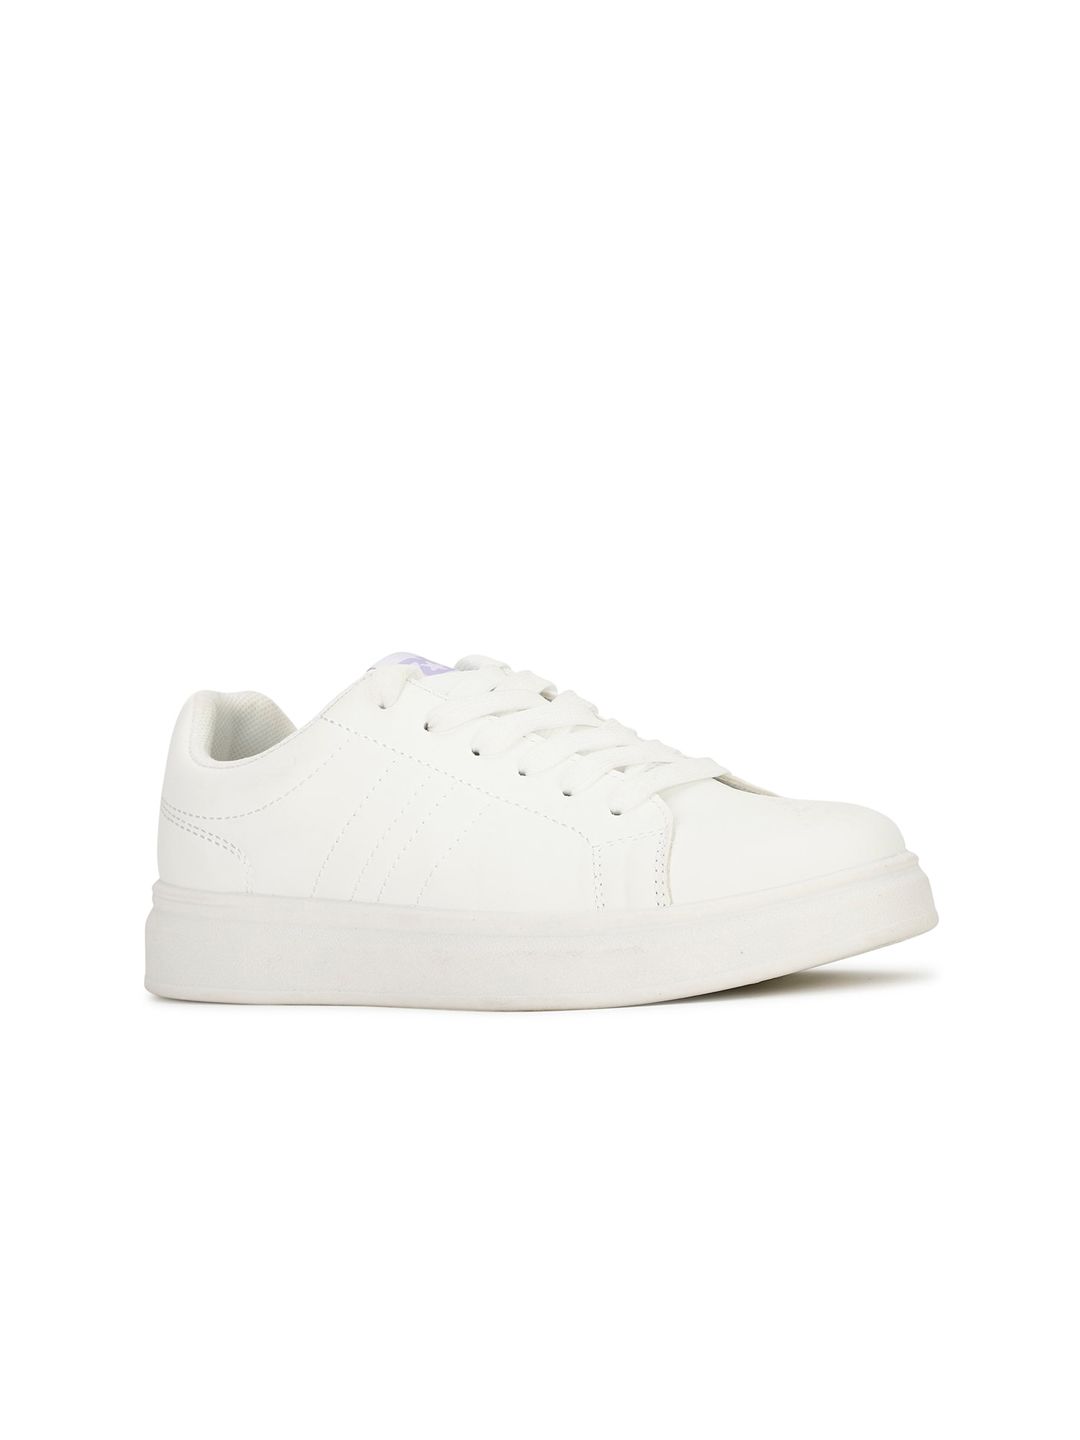 North Star Women Comfort Insole Basics Sneakers Price in India